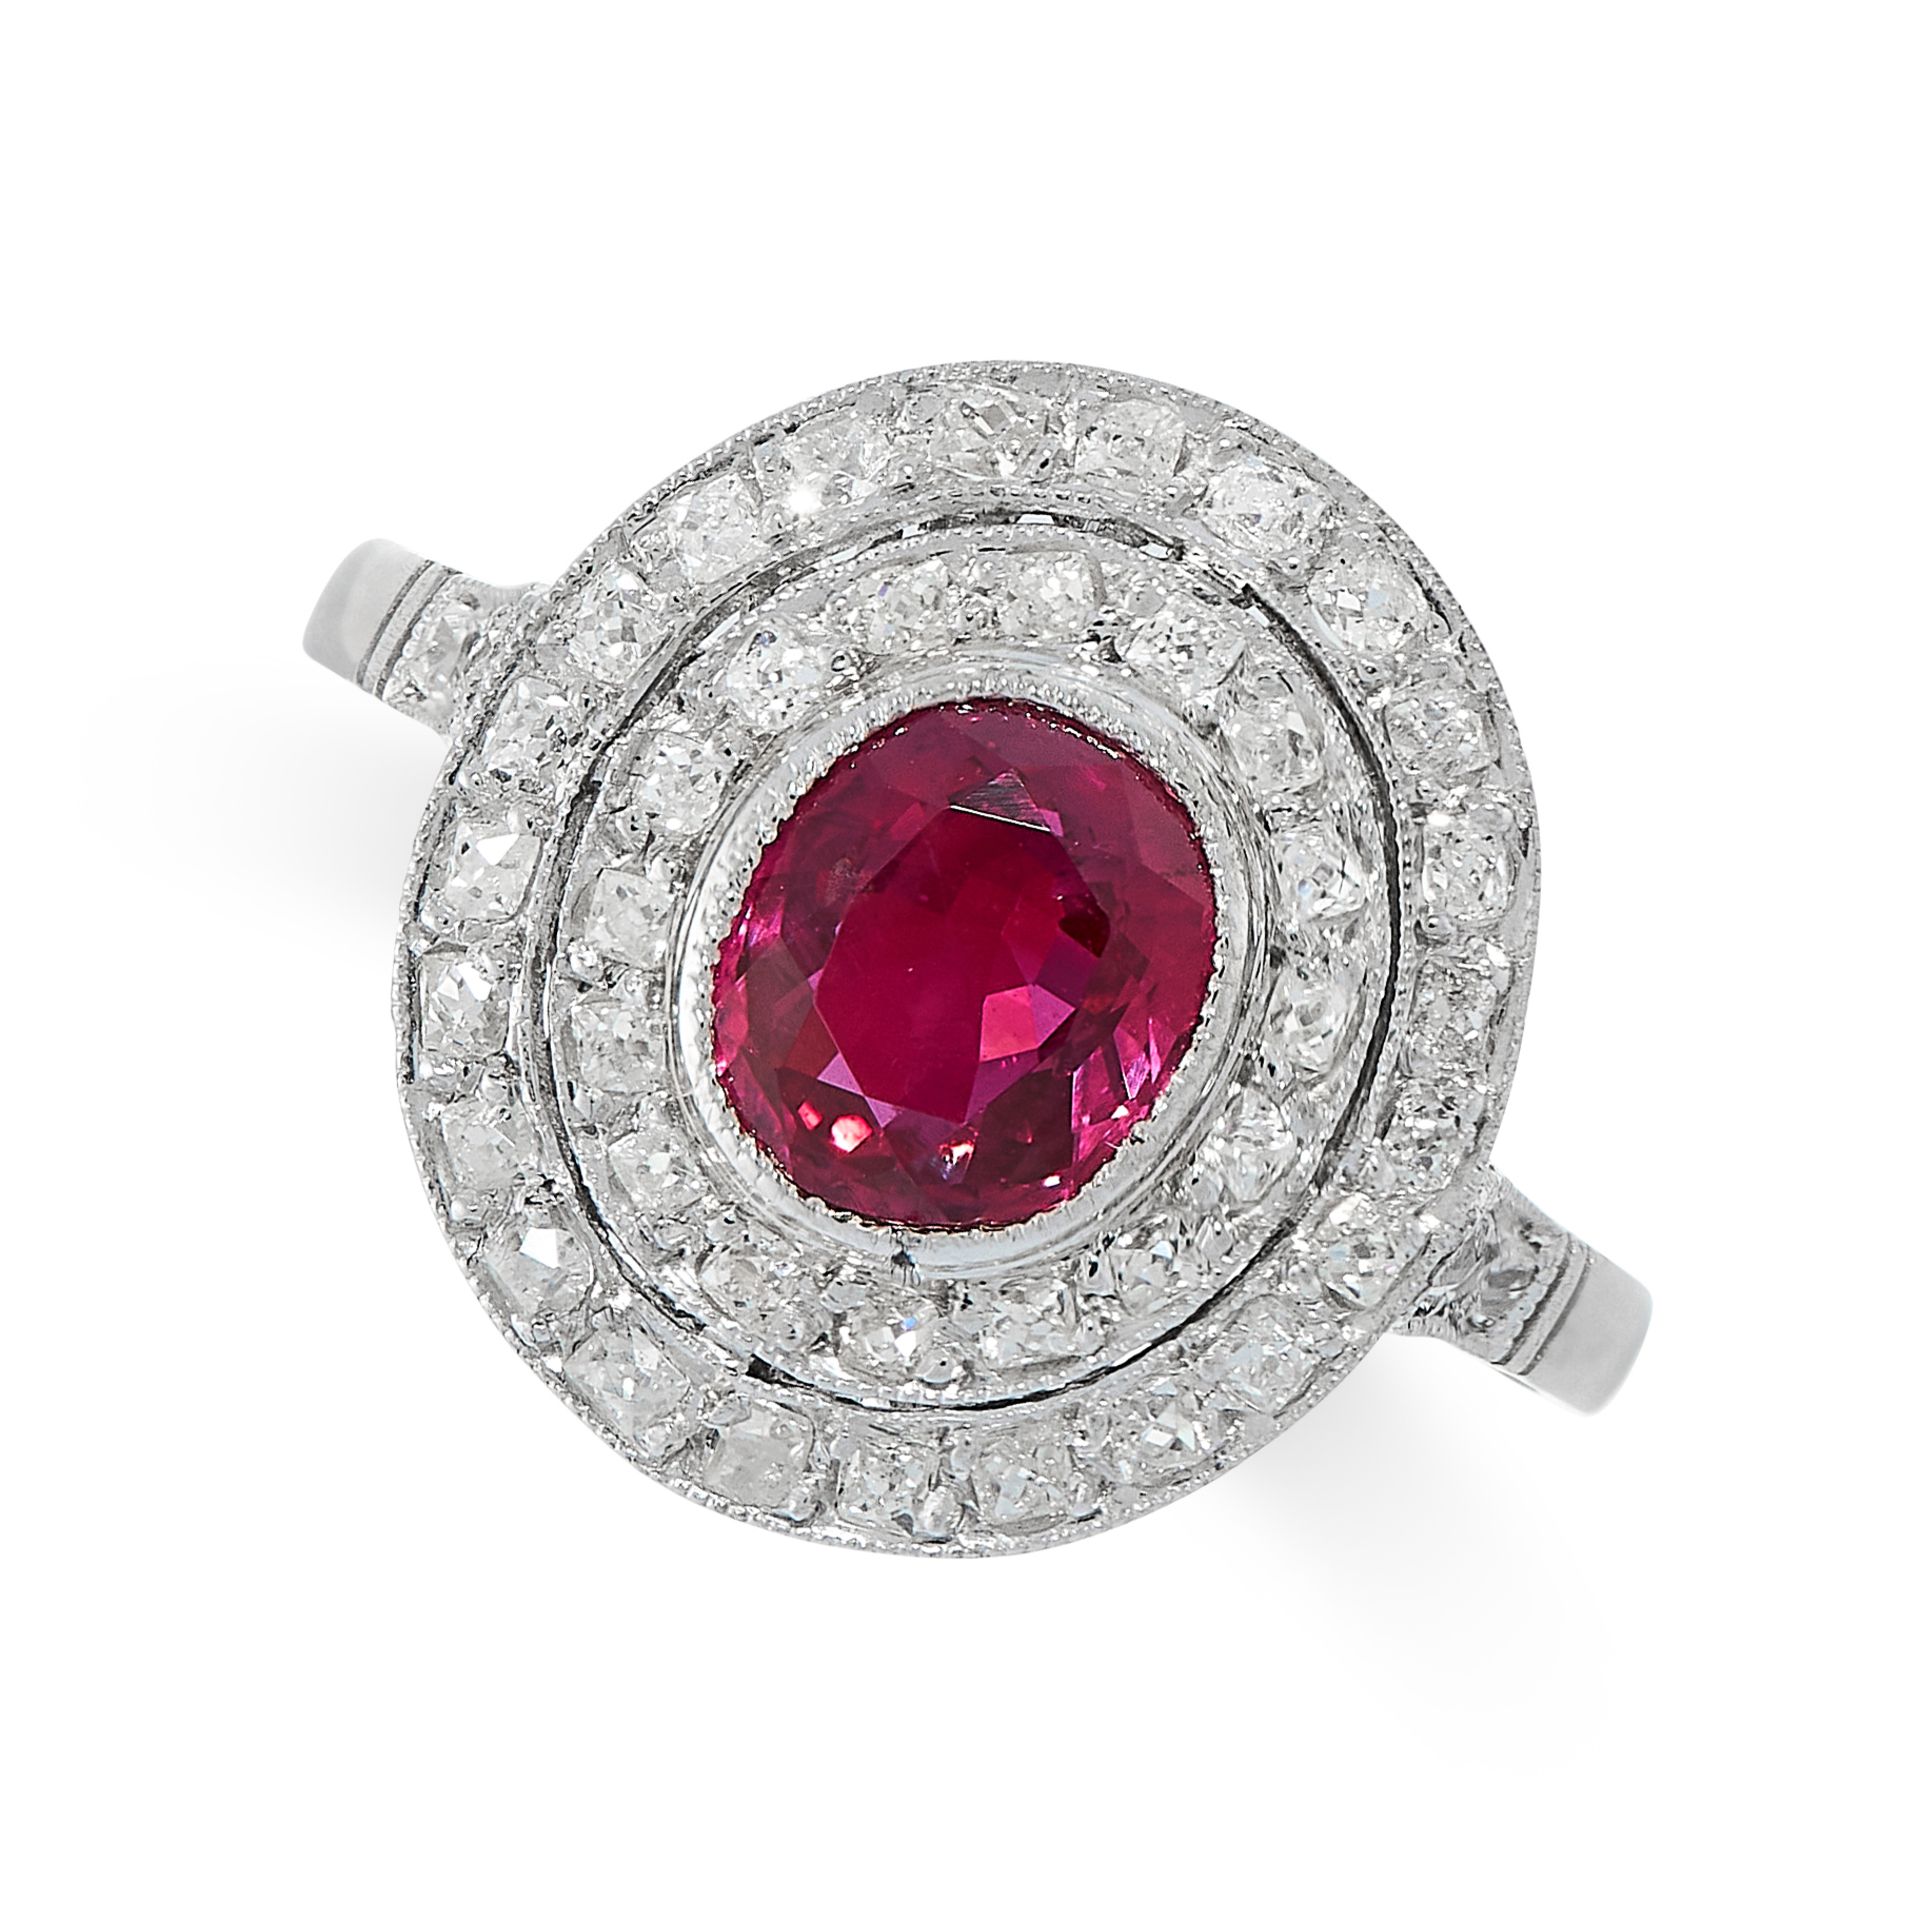 RUBY AND DIAMOND DRESS RING in platinum, set with an oval cut ruby of 1.23 carats within a border - Image 2 of 2